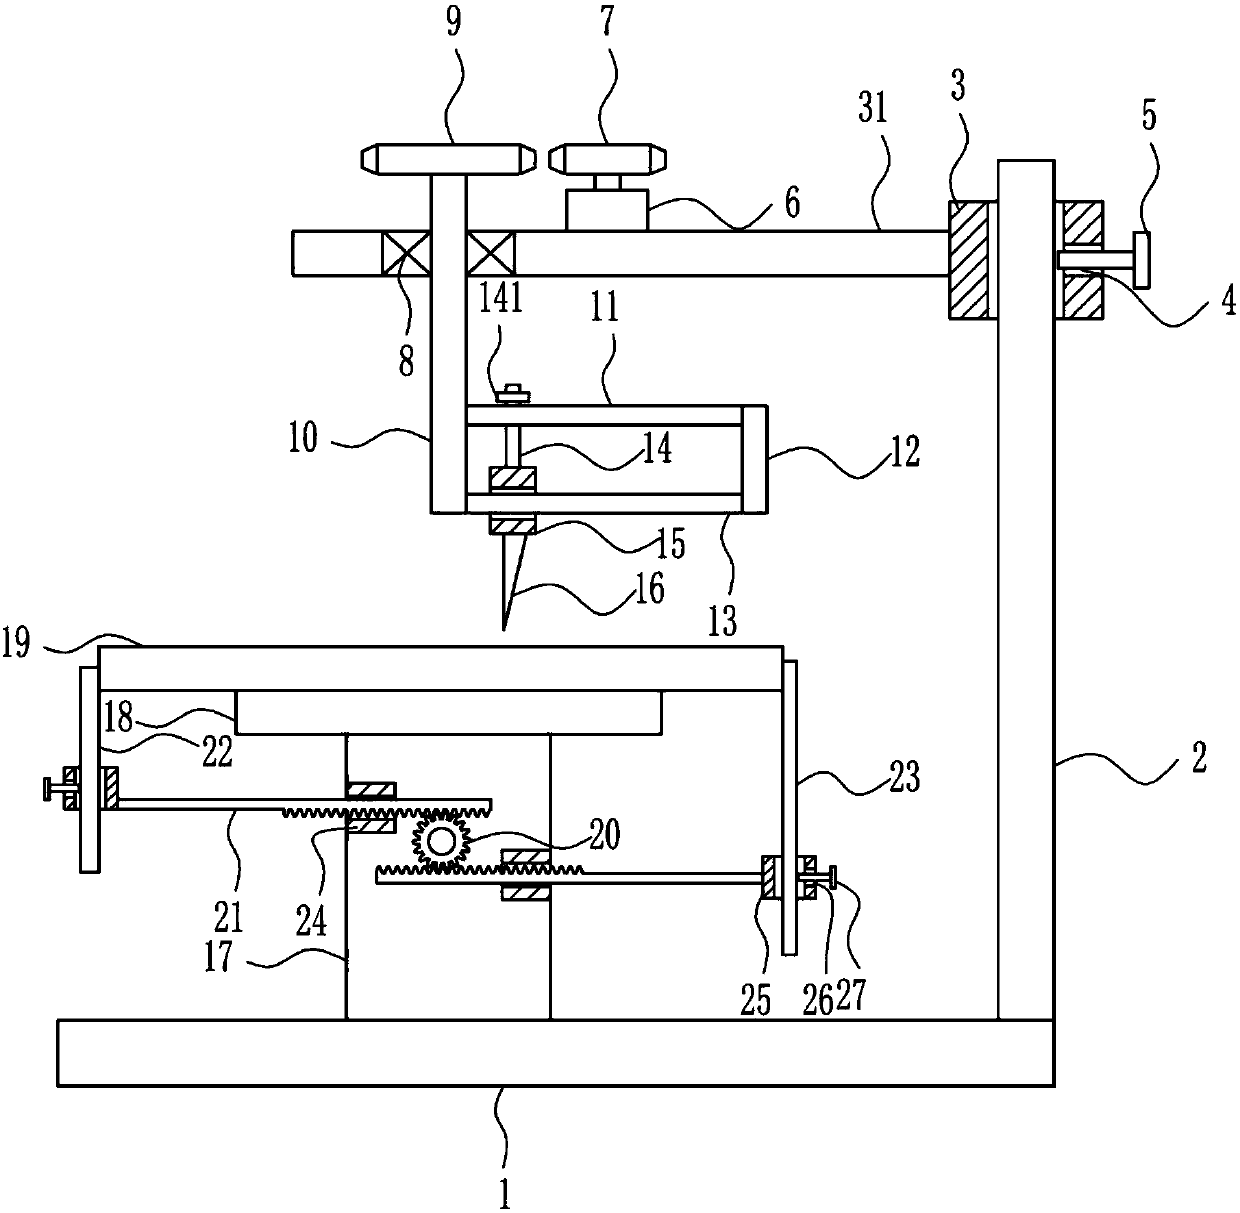 Apparatus for circle cutting of glass curtain wall